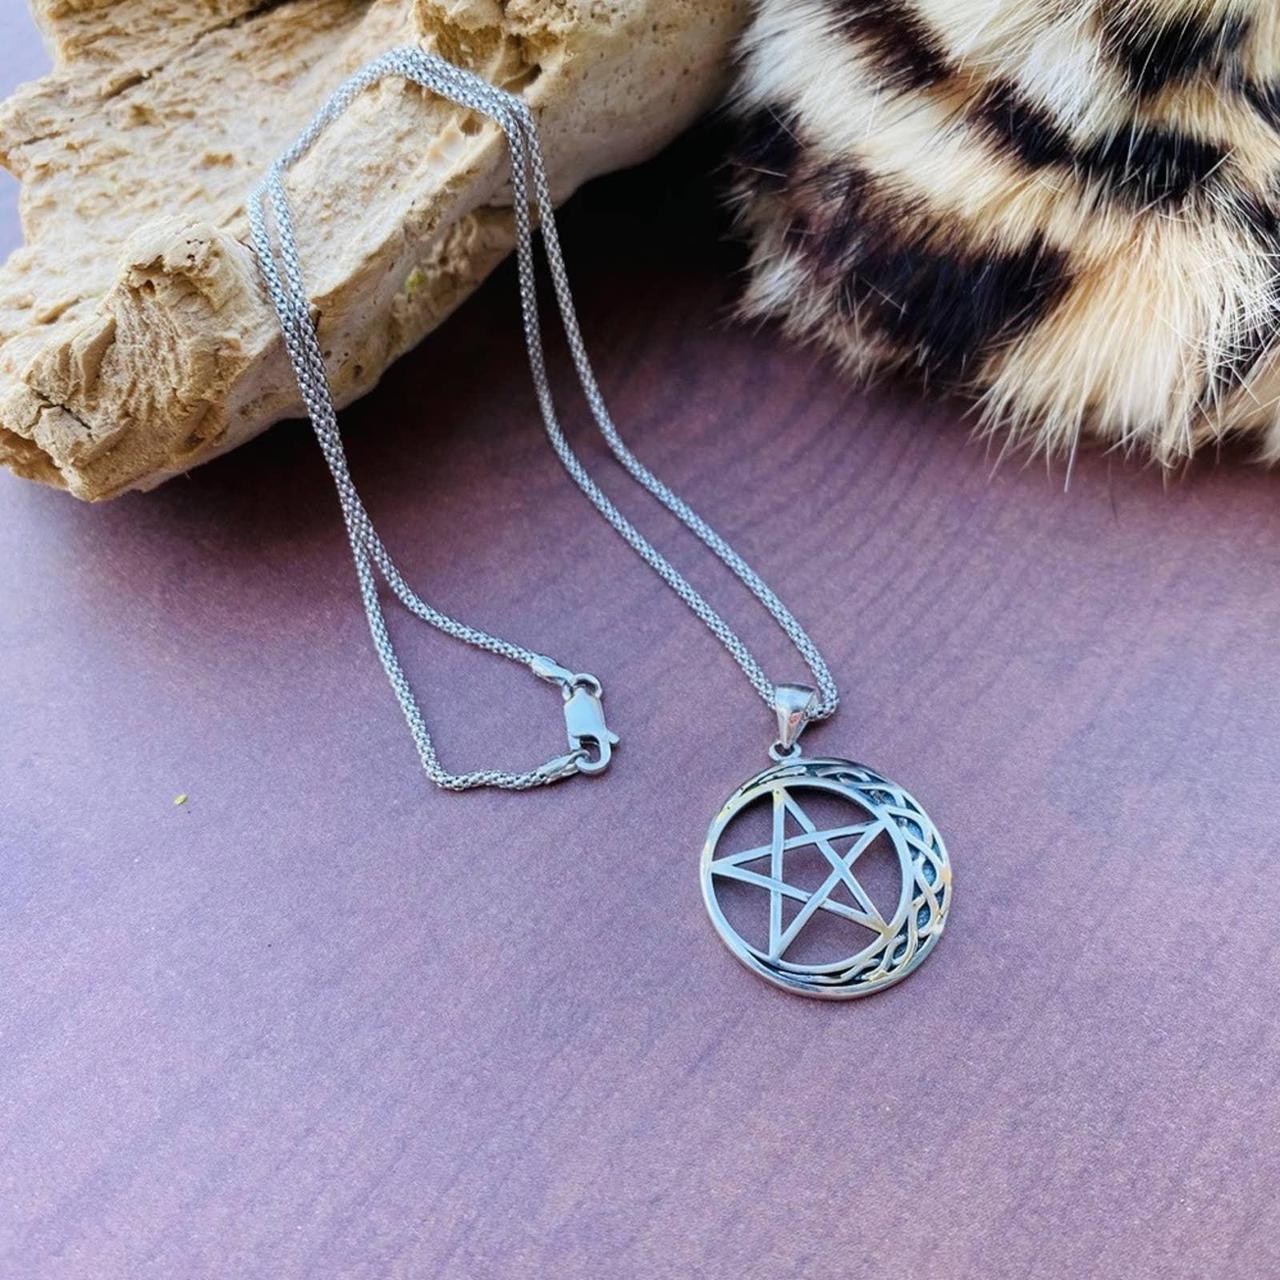 Product Image 1 - Celtic Crescent Moon And Star